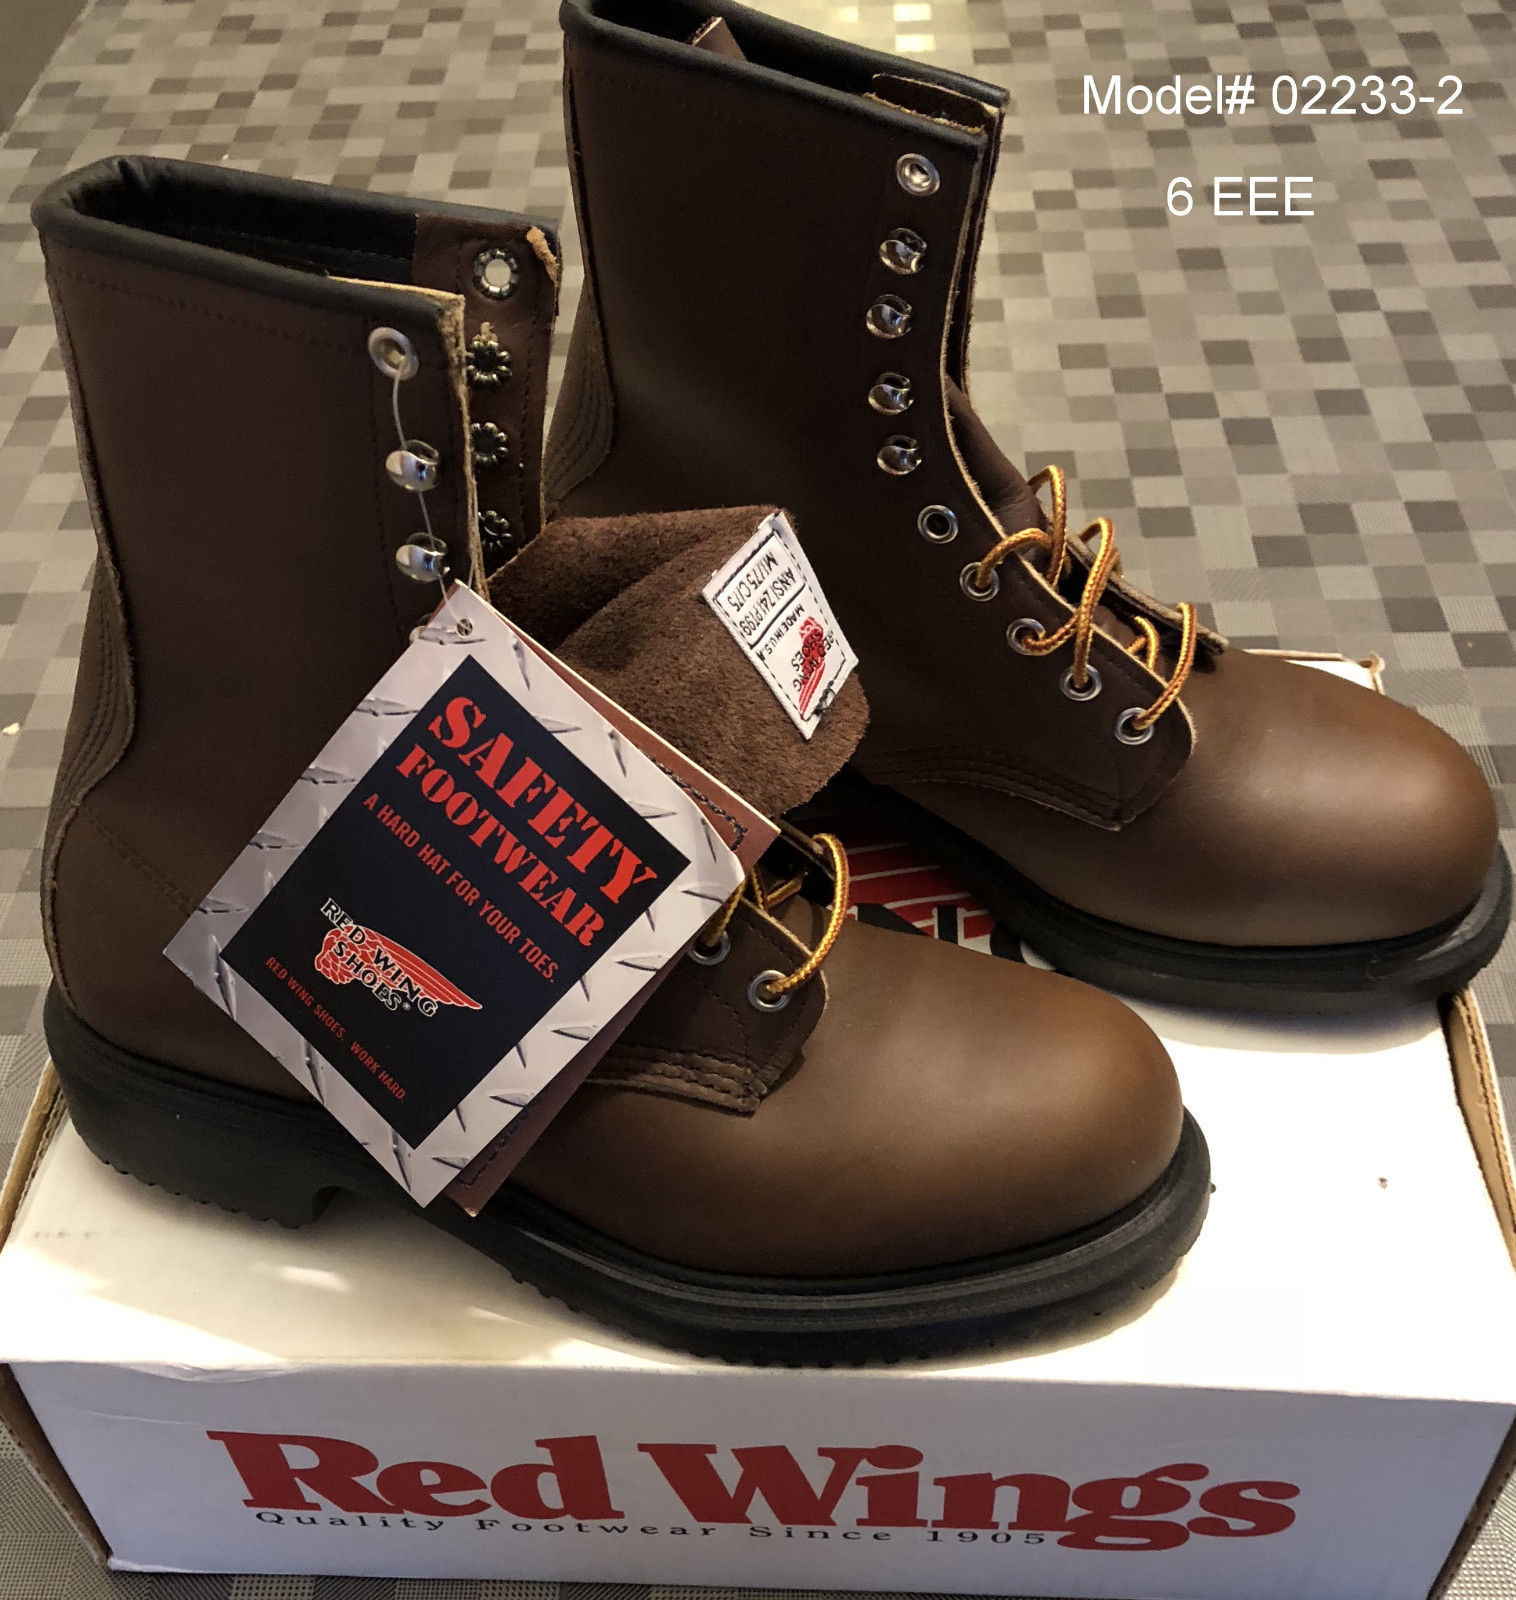 red wing boots 2233